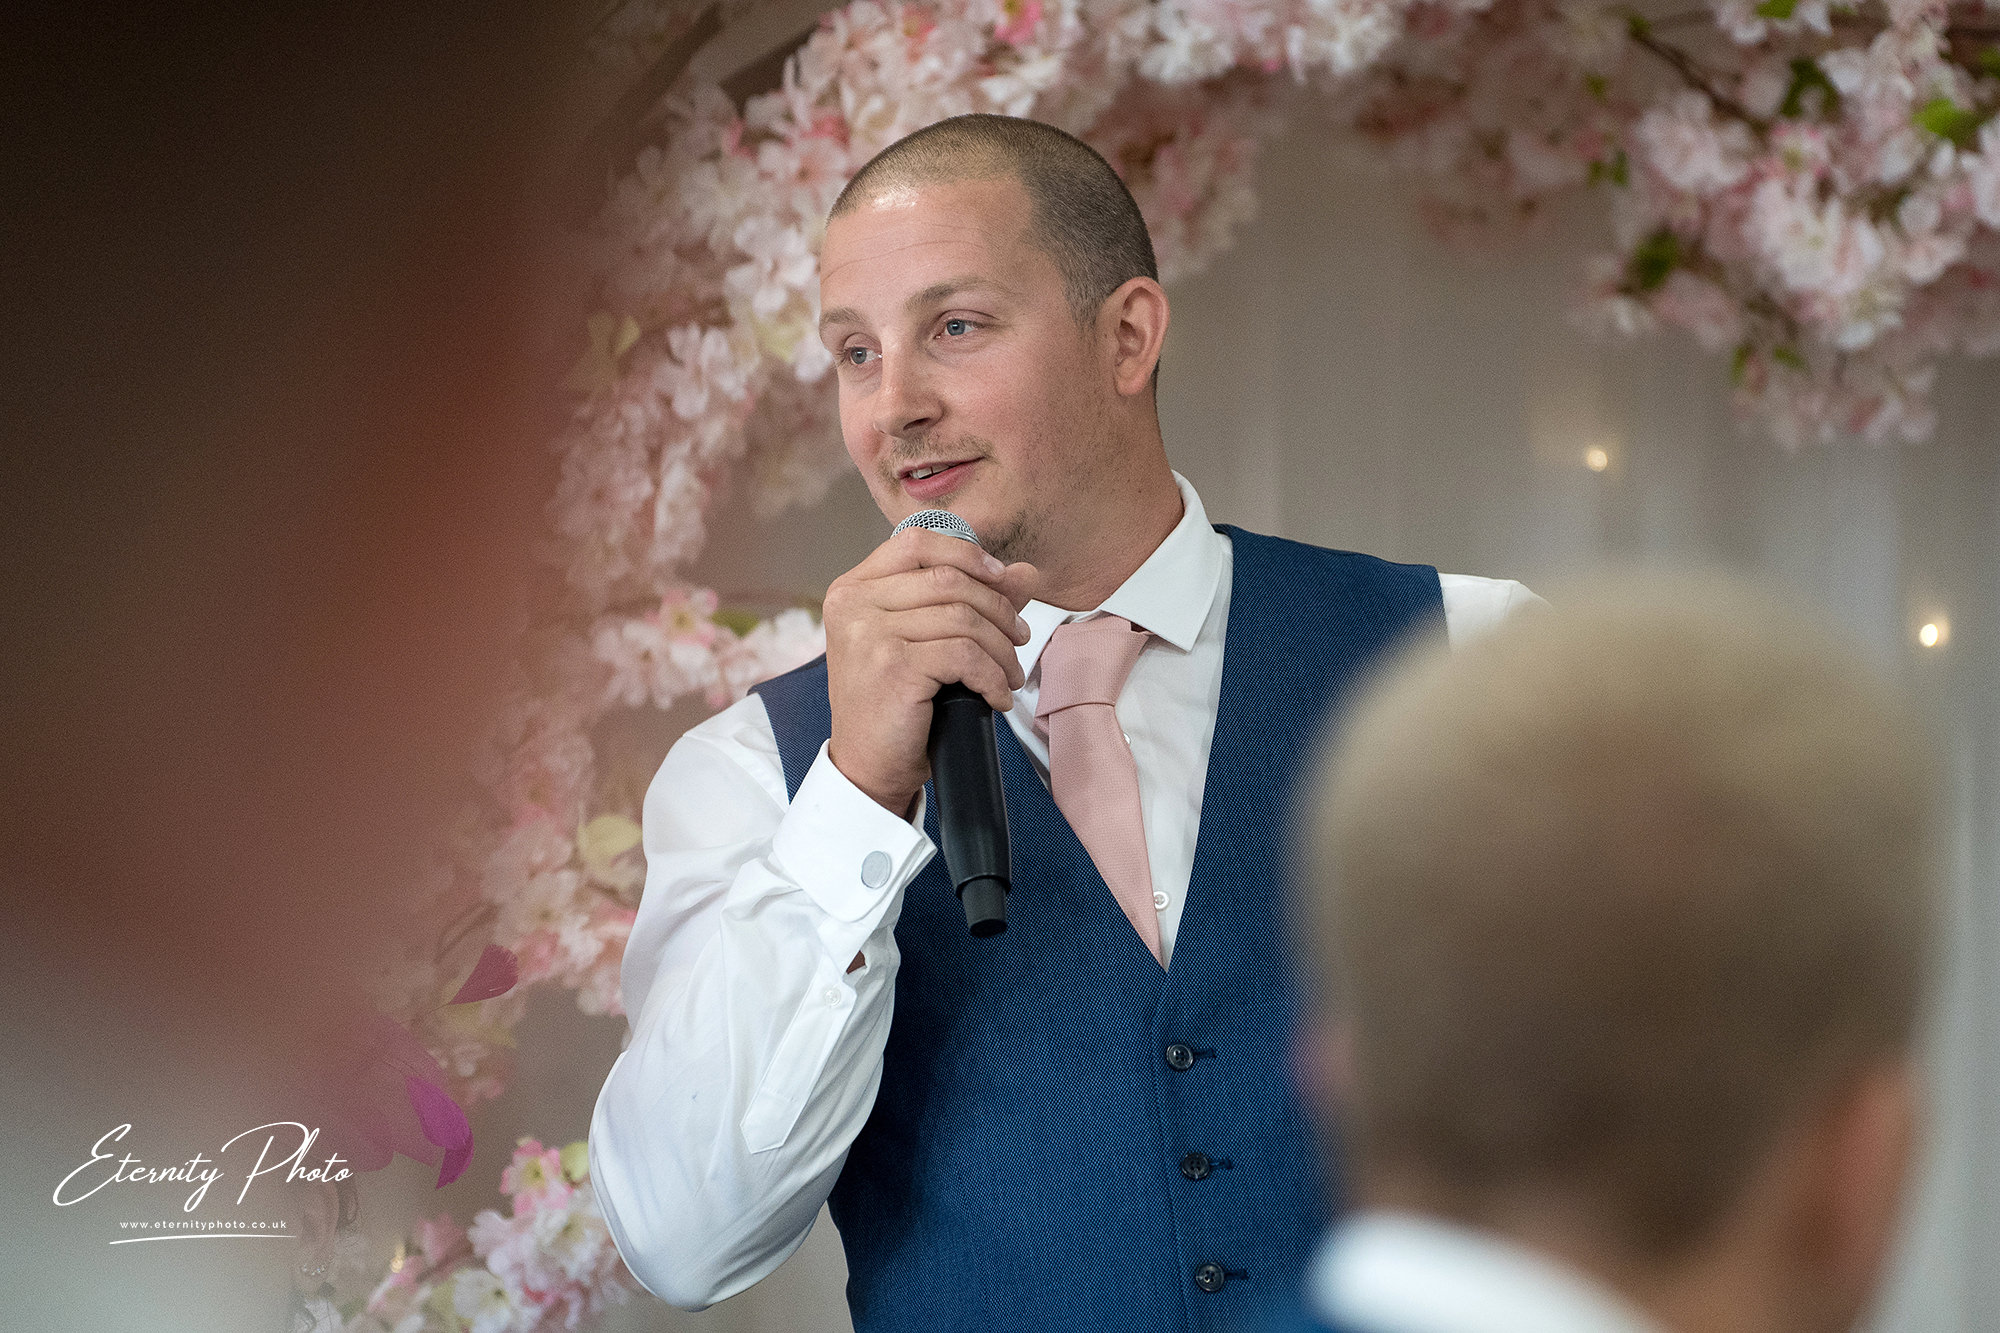 Man giving speech at wedding with microphone.